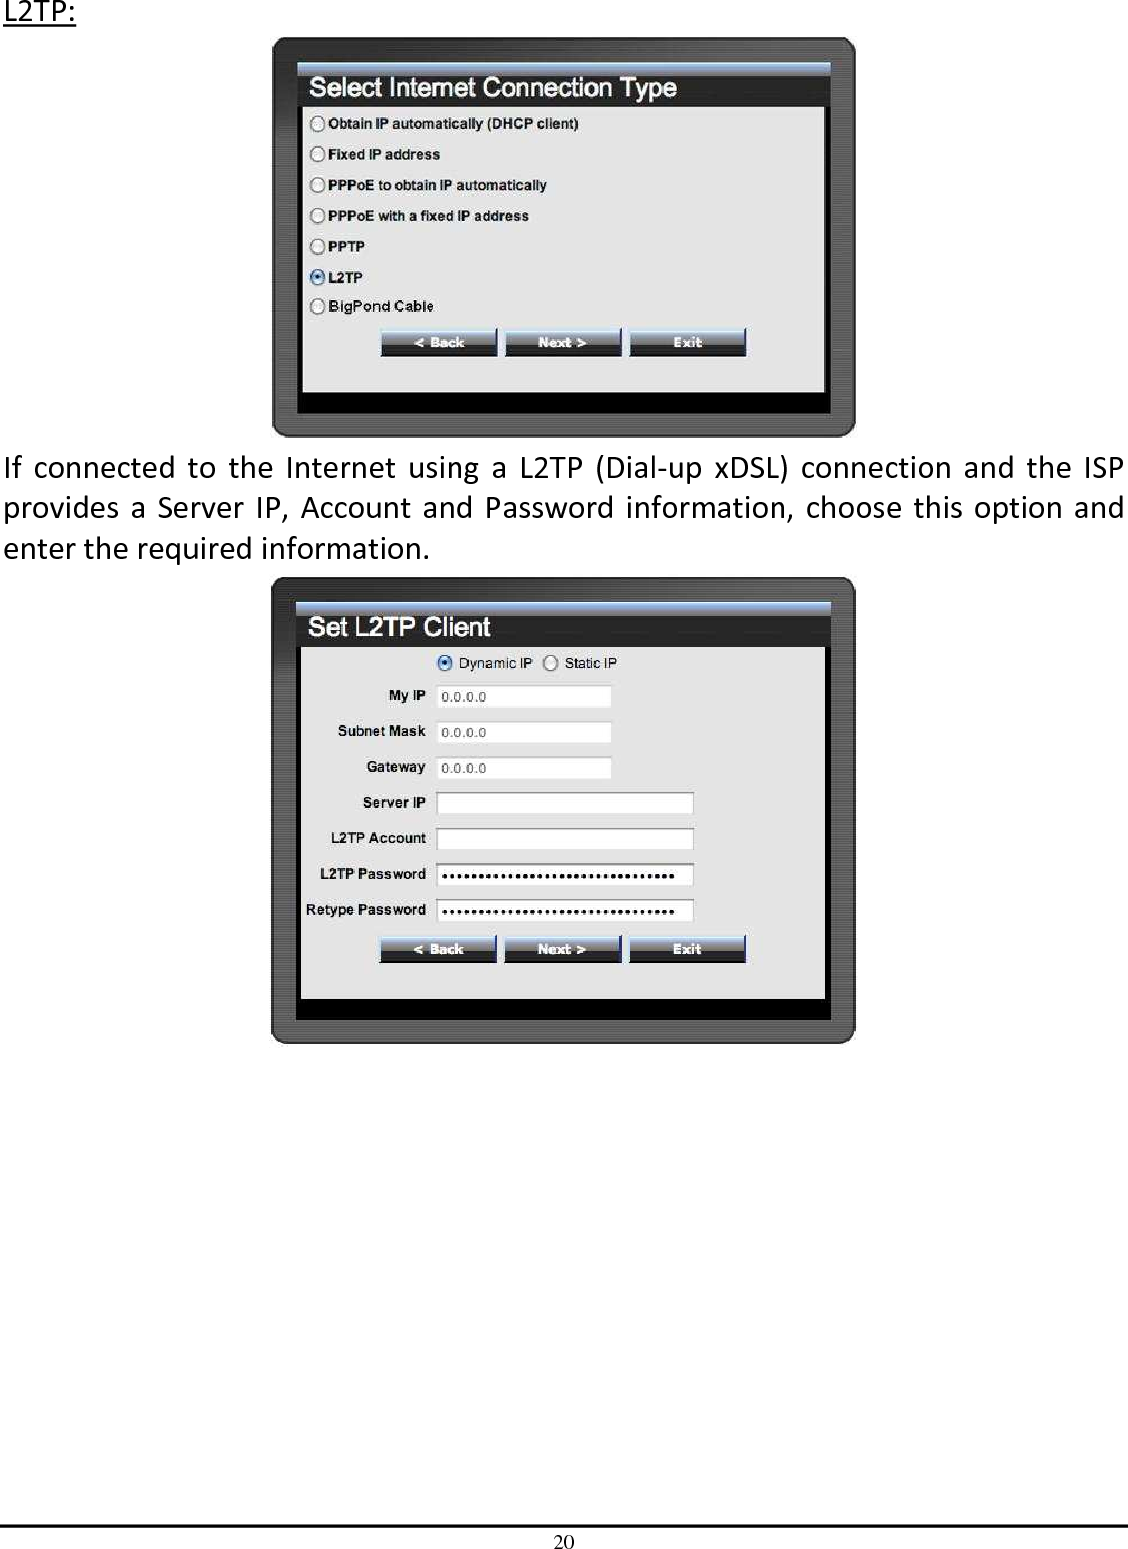 20 L2TP:  If  connected  to the  Internet  using  a  L2TP  (Dial-up  xDSL)  connection  and  the  ISP provides a Server IP, Account and Password information, choose this option and enter the required information.  